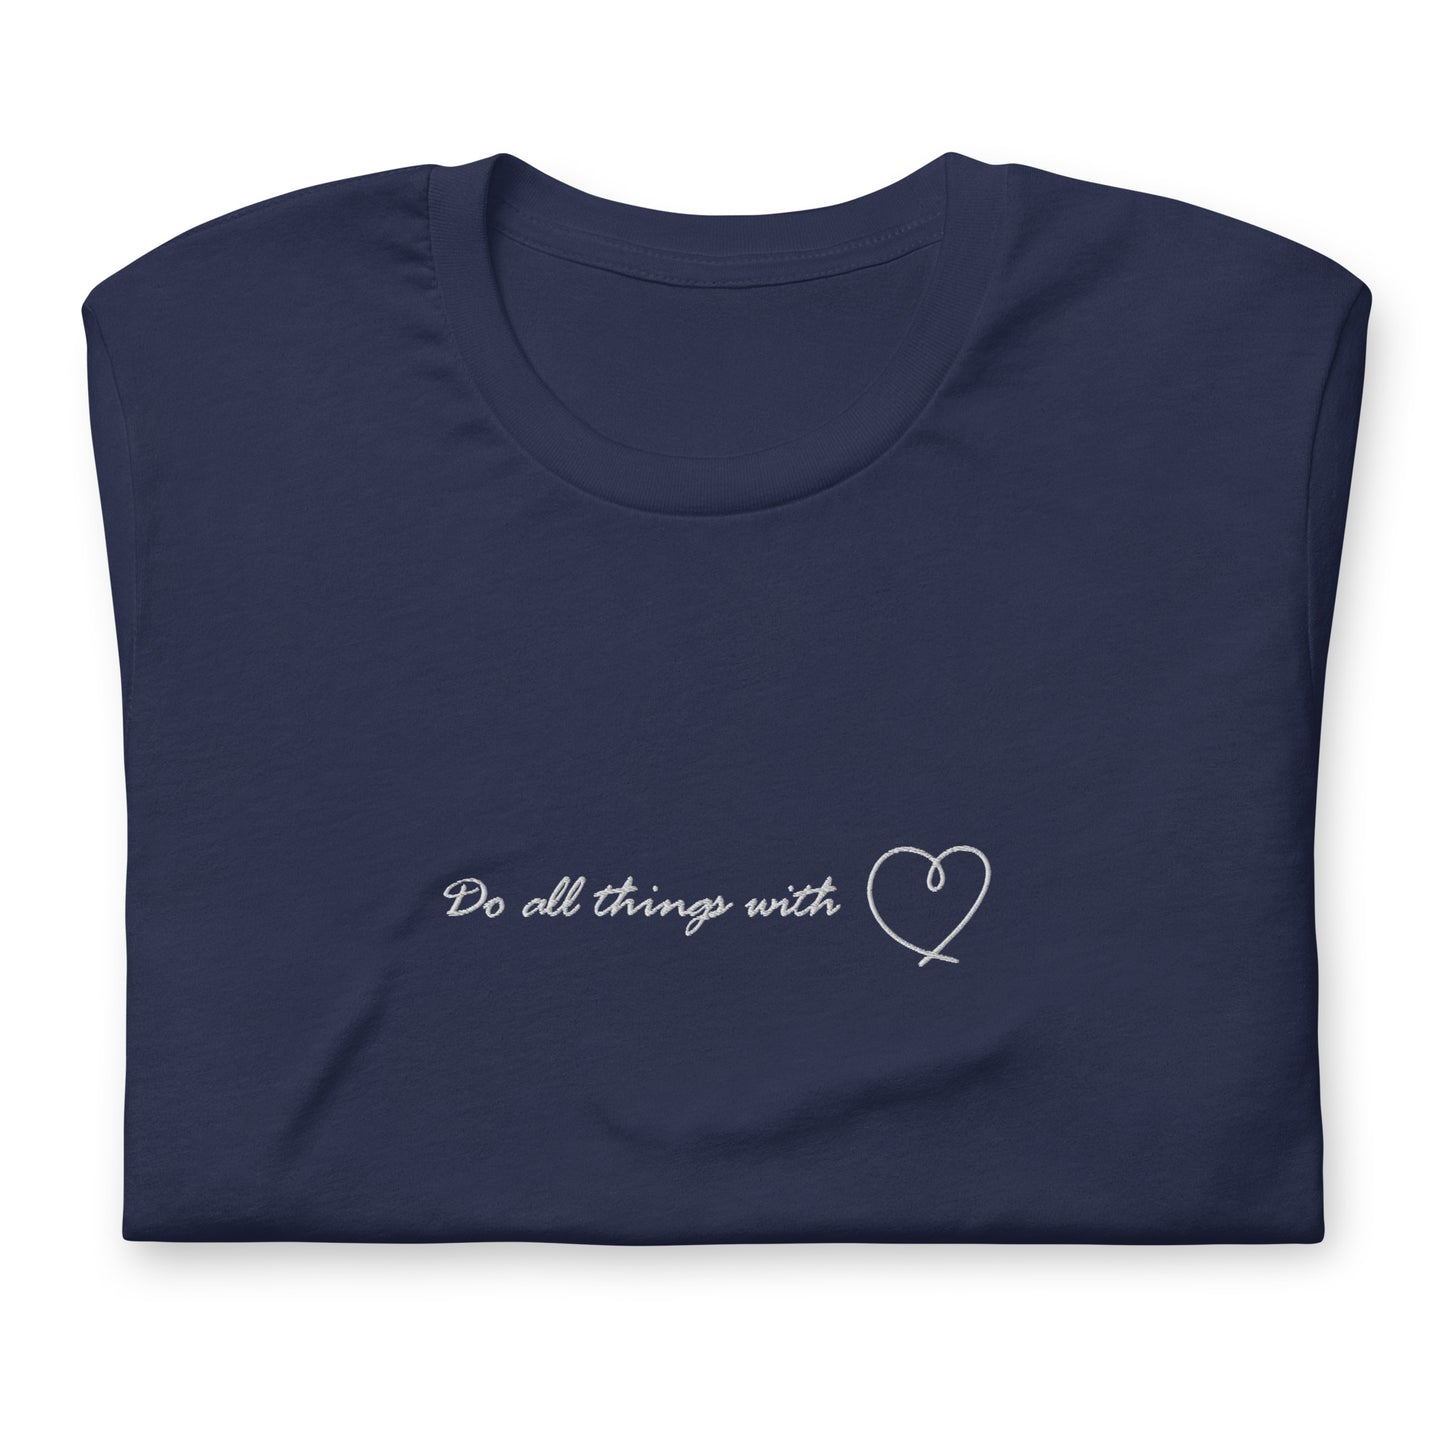 Do all things with love - besticktes T-Shirt